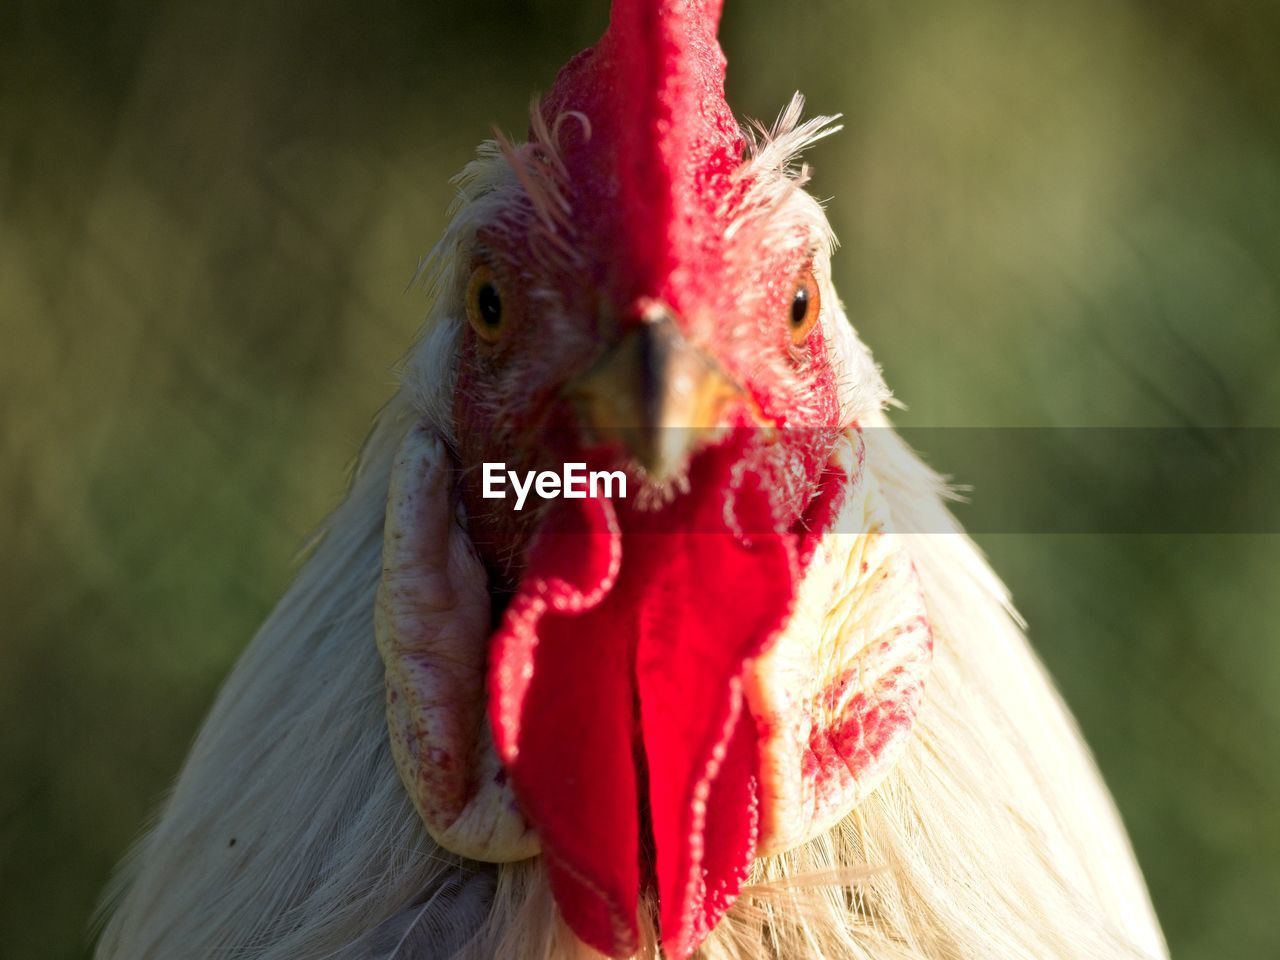 animal themes, animal, bird, red, livestock, chicken, domestic animals, rooster, close-up, one animal, beak, pet, comb, mammal, animal body part, animal head, agriculture, cockerel, portrait, nature, no people, focus on foreground, domesticated turkey, animal's crest, outdoors